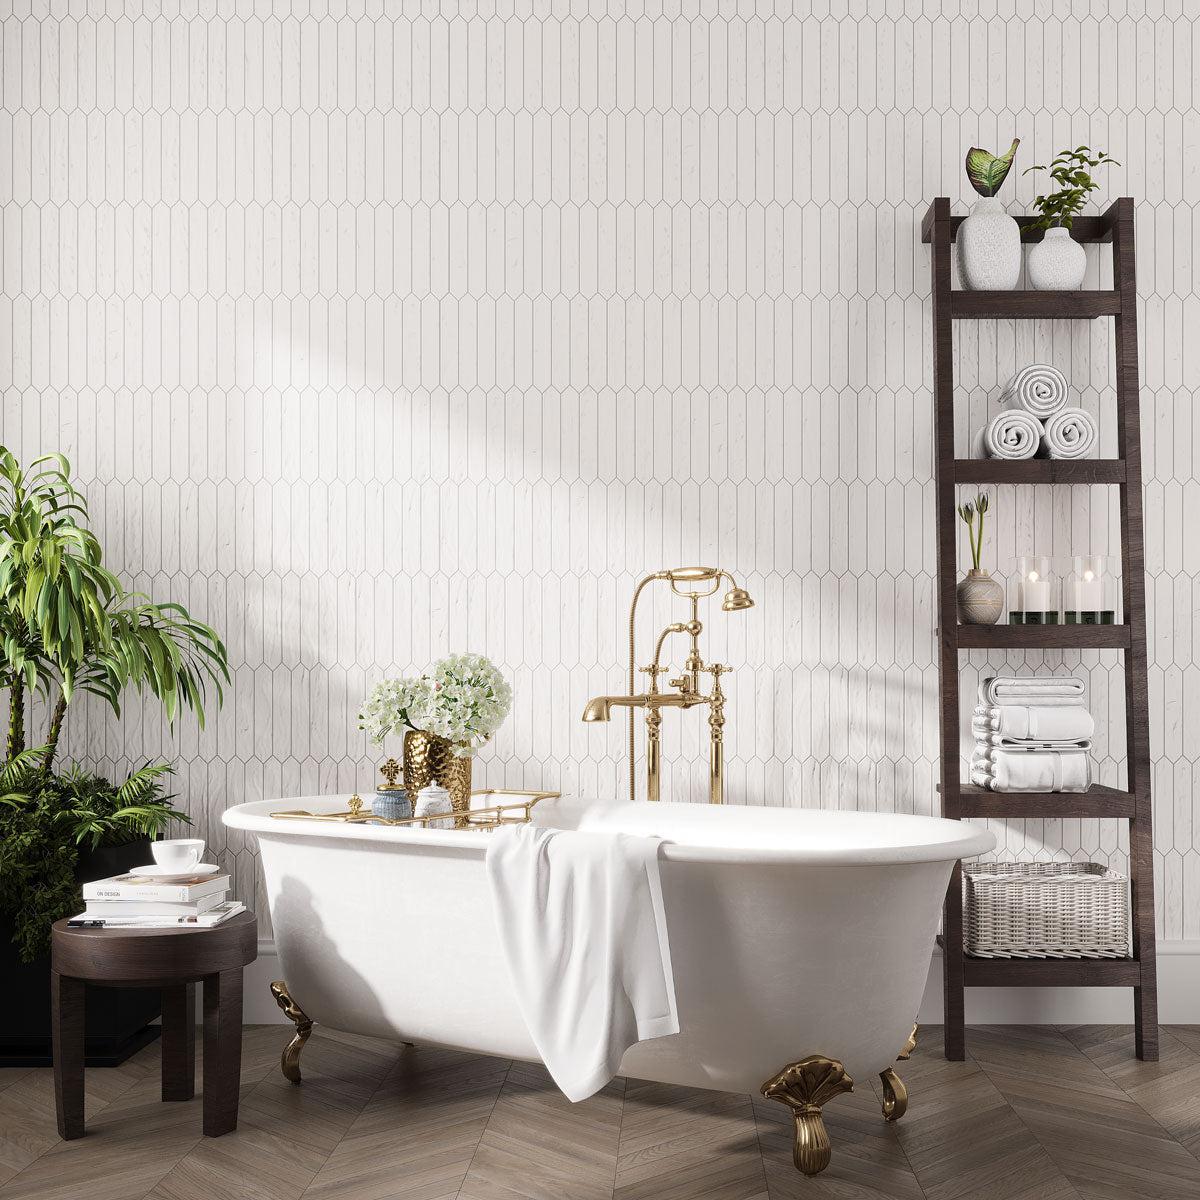 Bright and airy white bathroom with picket wall tiles